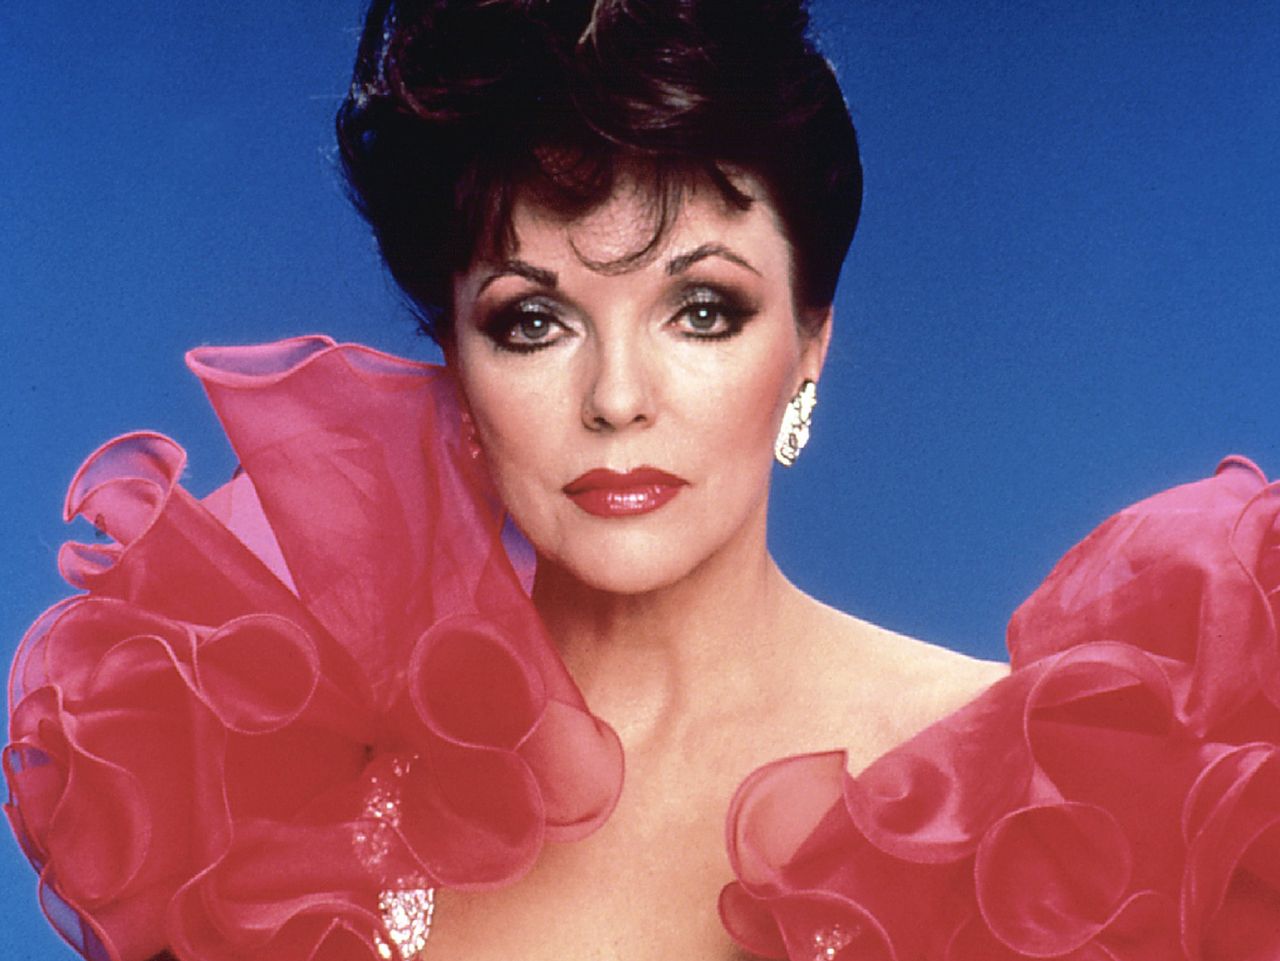 Joan Collins played, among others, the role of Alexis in "Dynasty".